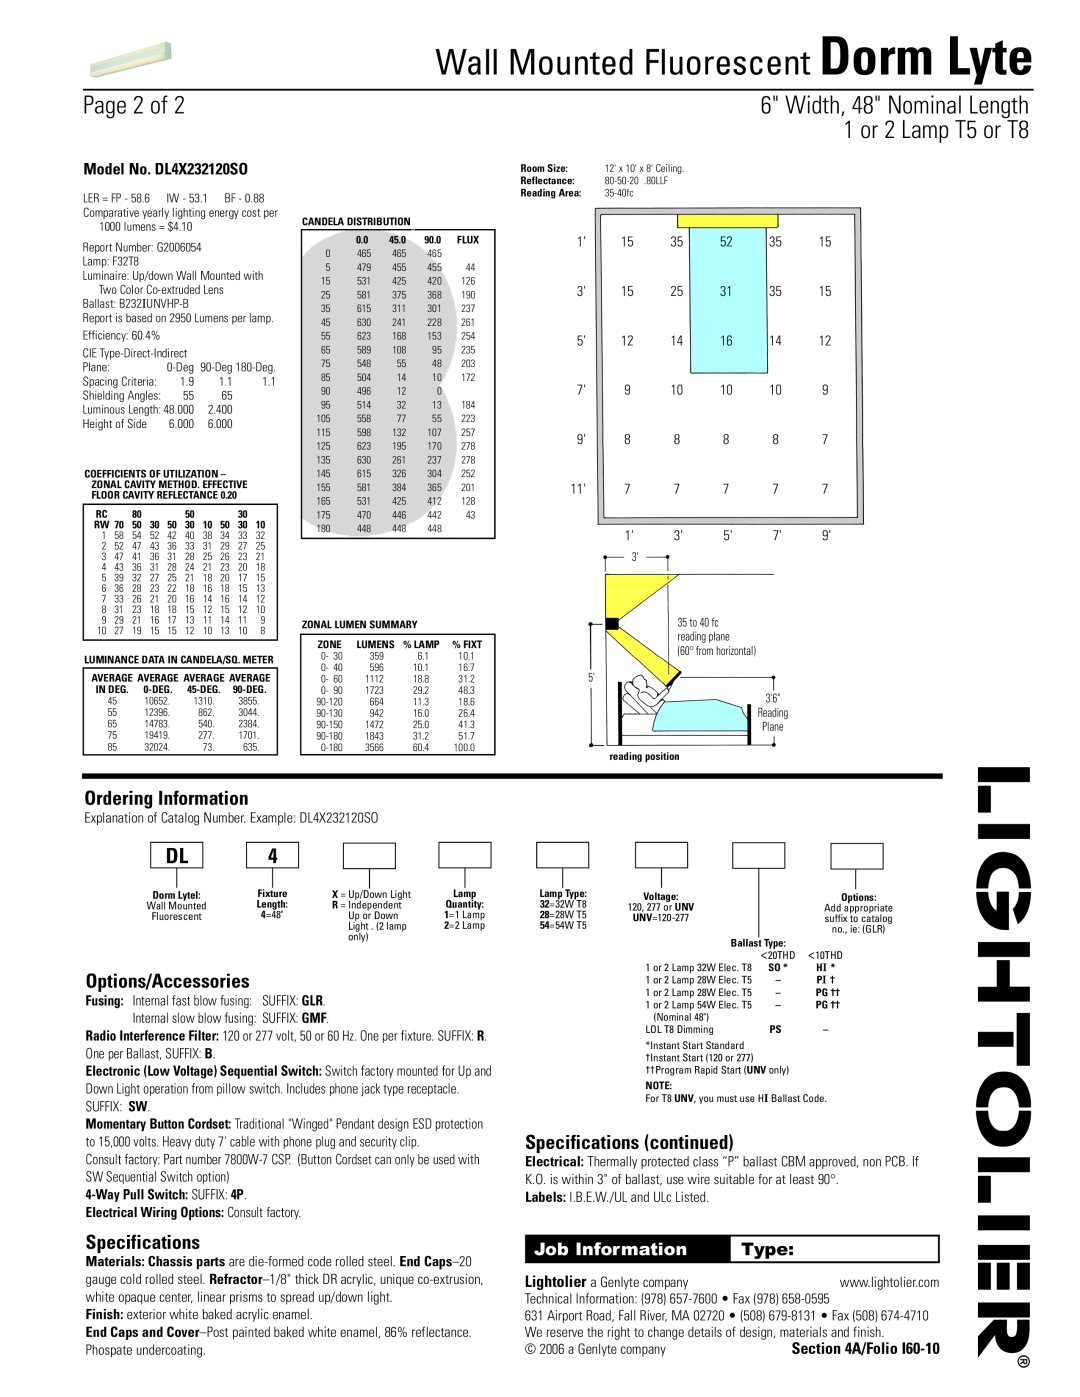 Lightolier Dorm Lyte Page 2 of, Ordering Information, Options/Accessories, Specifications continued, Job Information, Type 